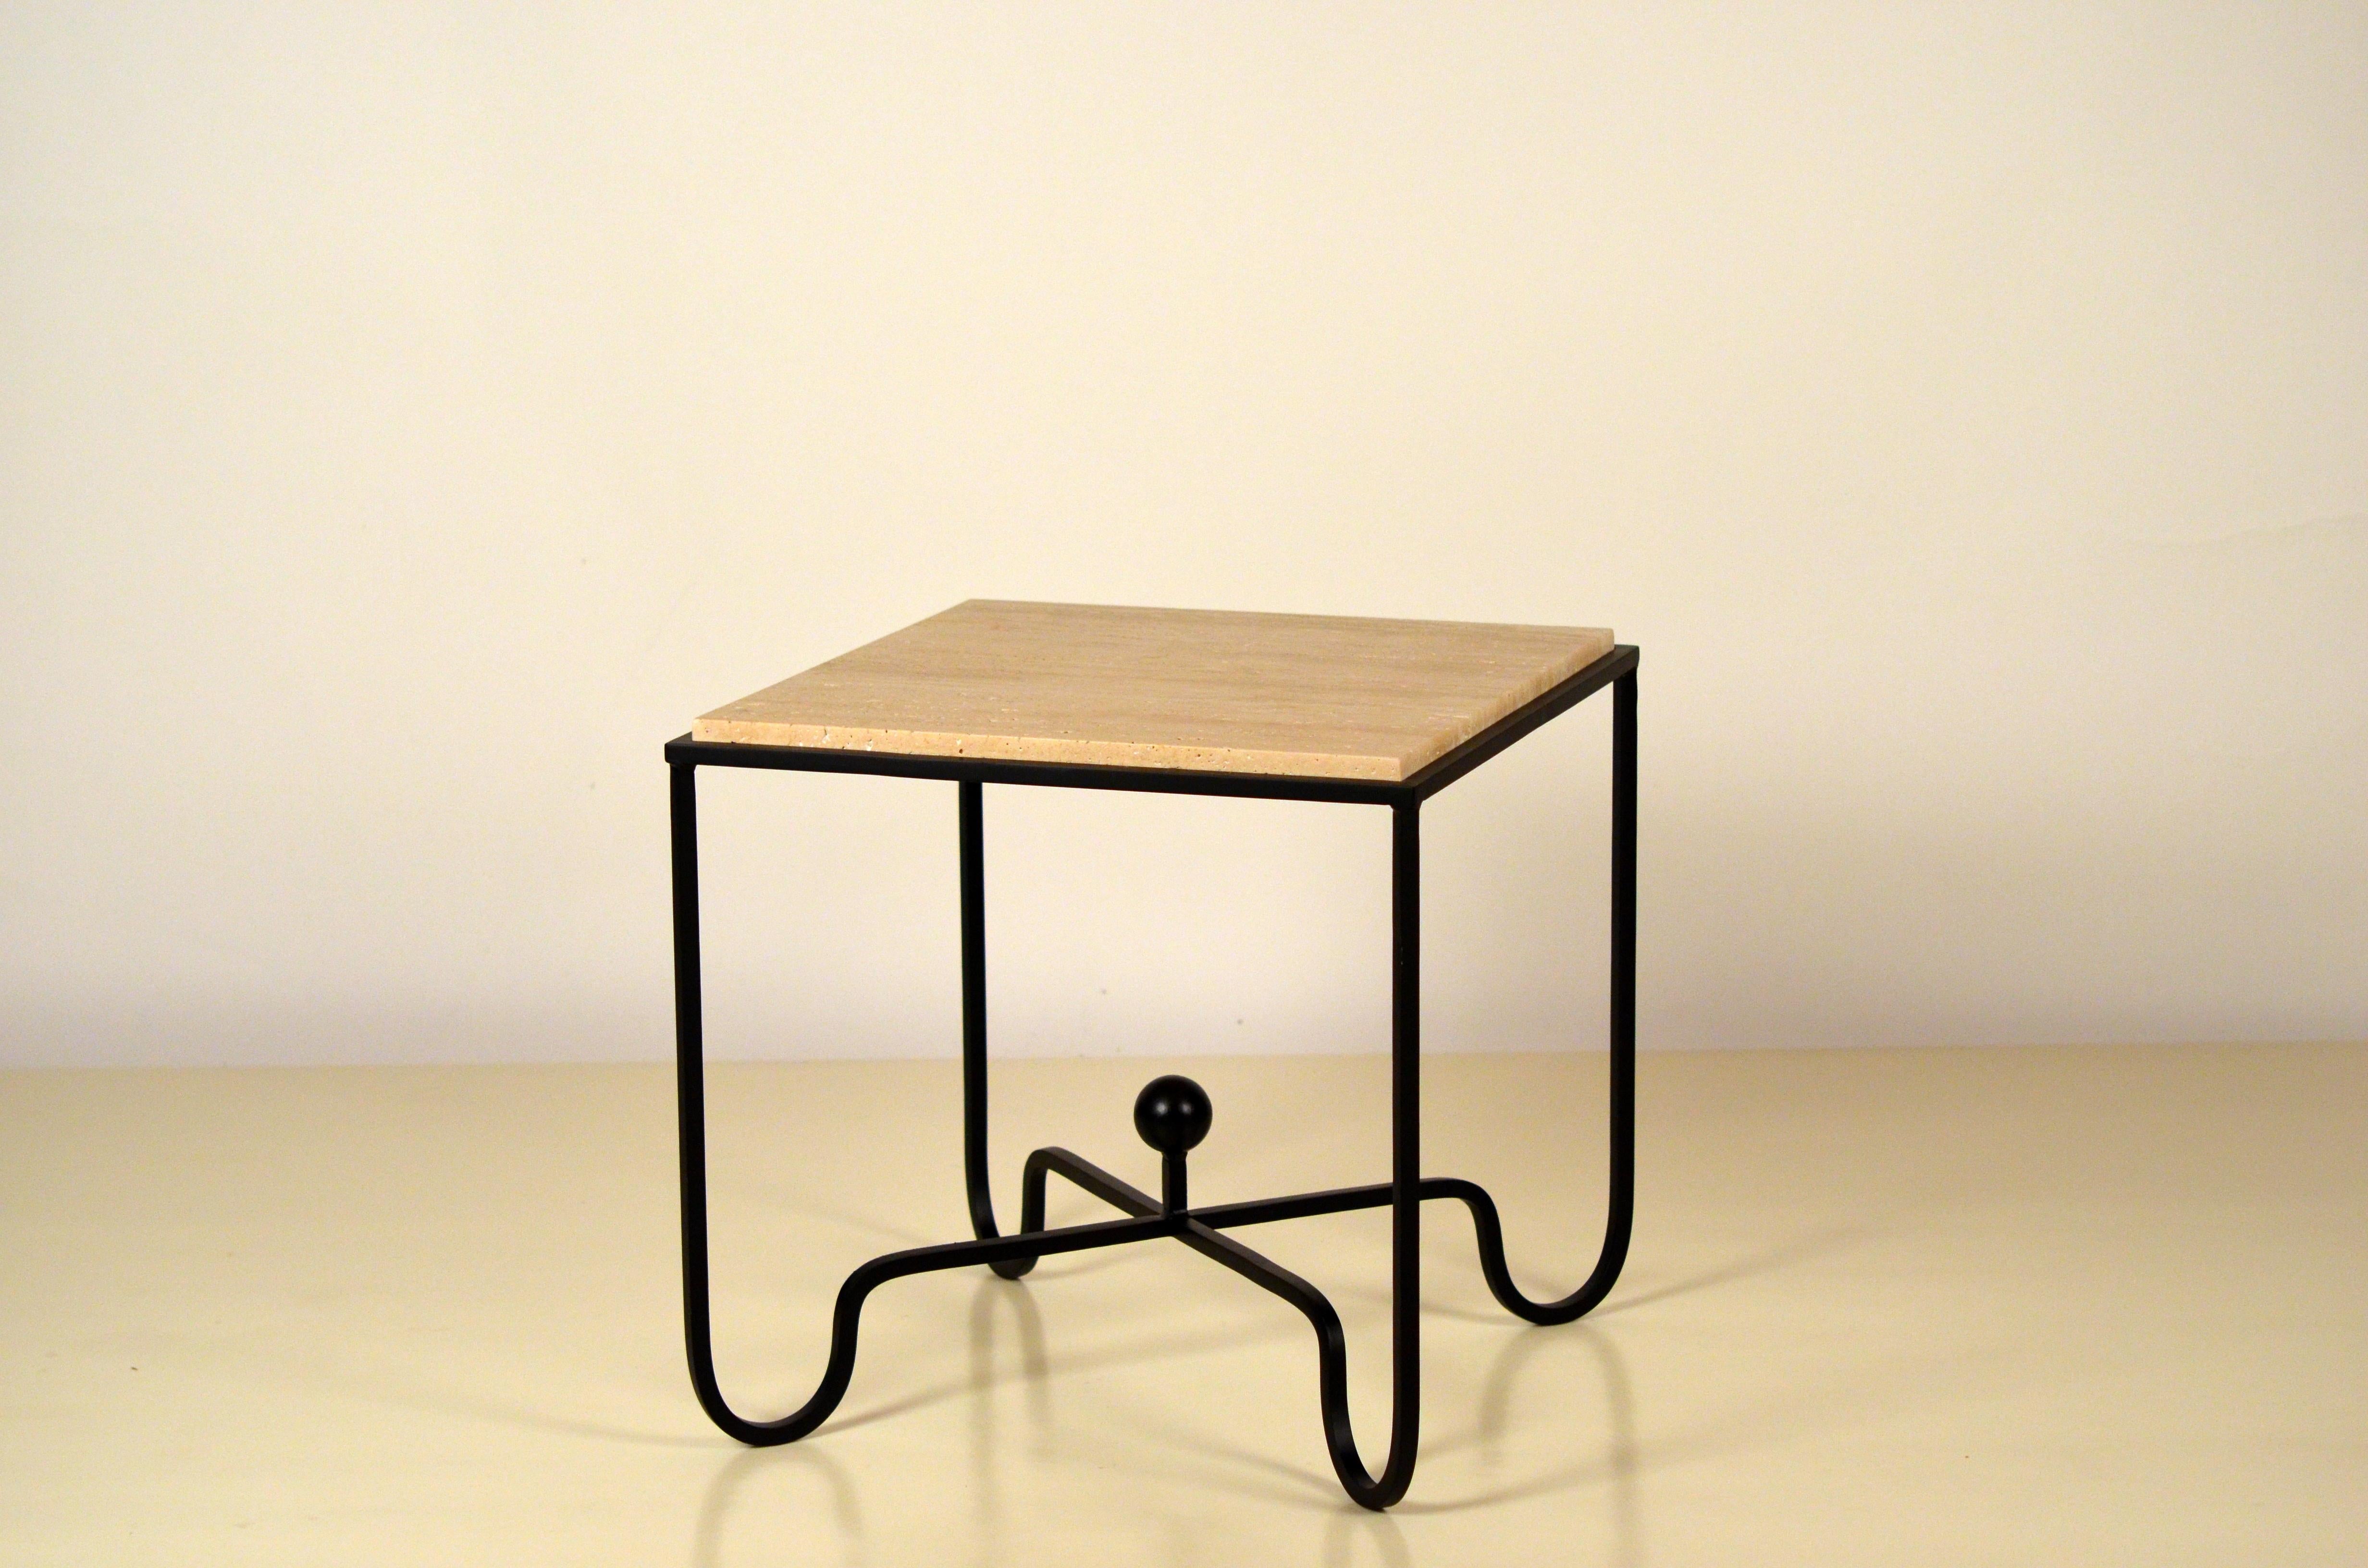 Pair of Wrought Iron and Travertine 'Entretoise' Side Tables by Design Frères For Sale 4